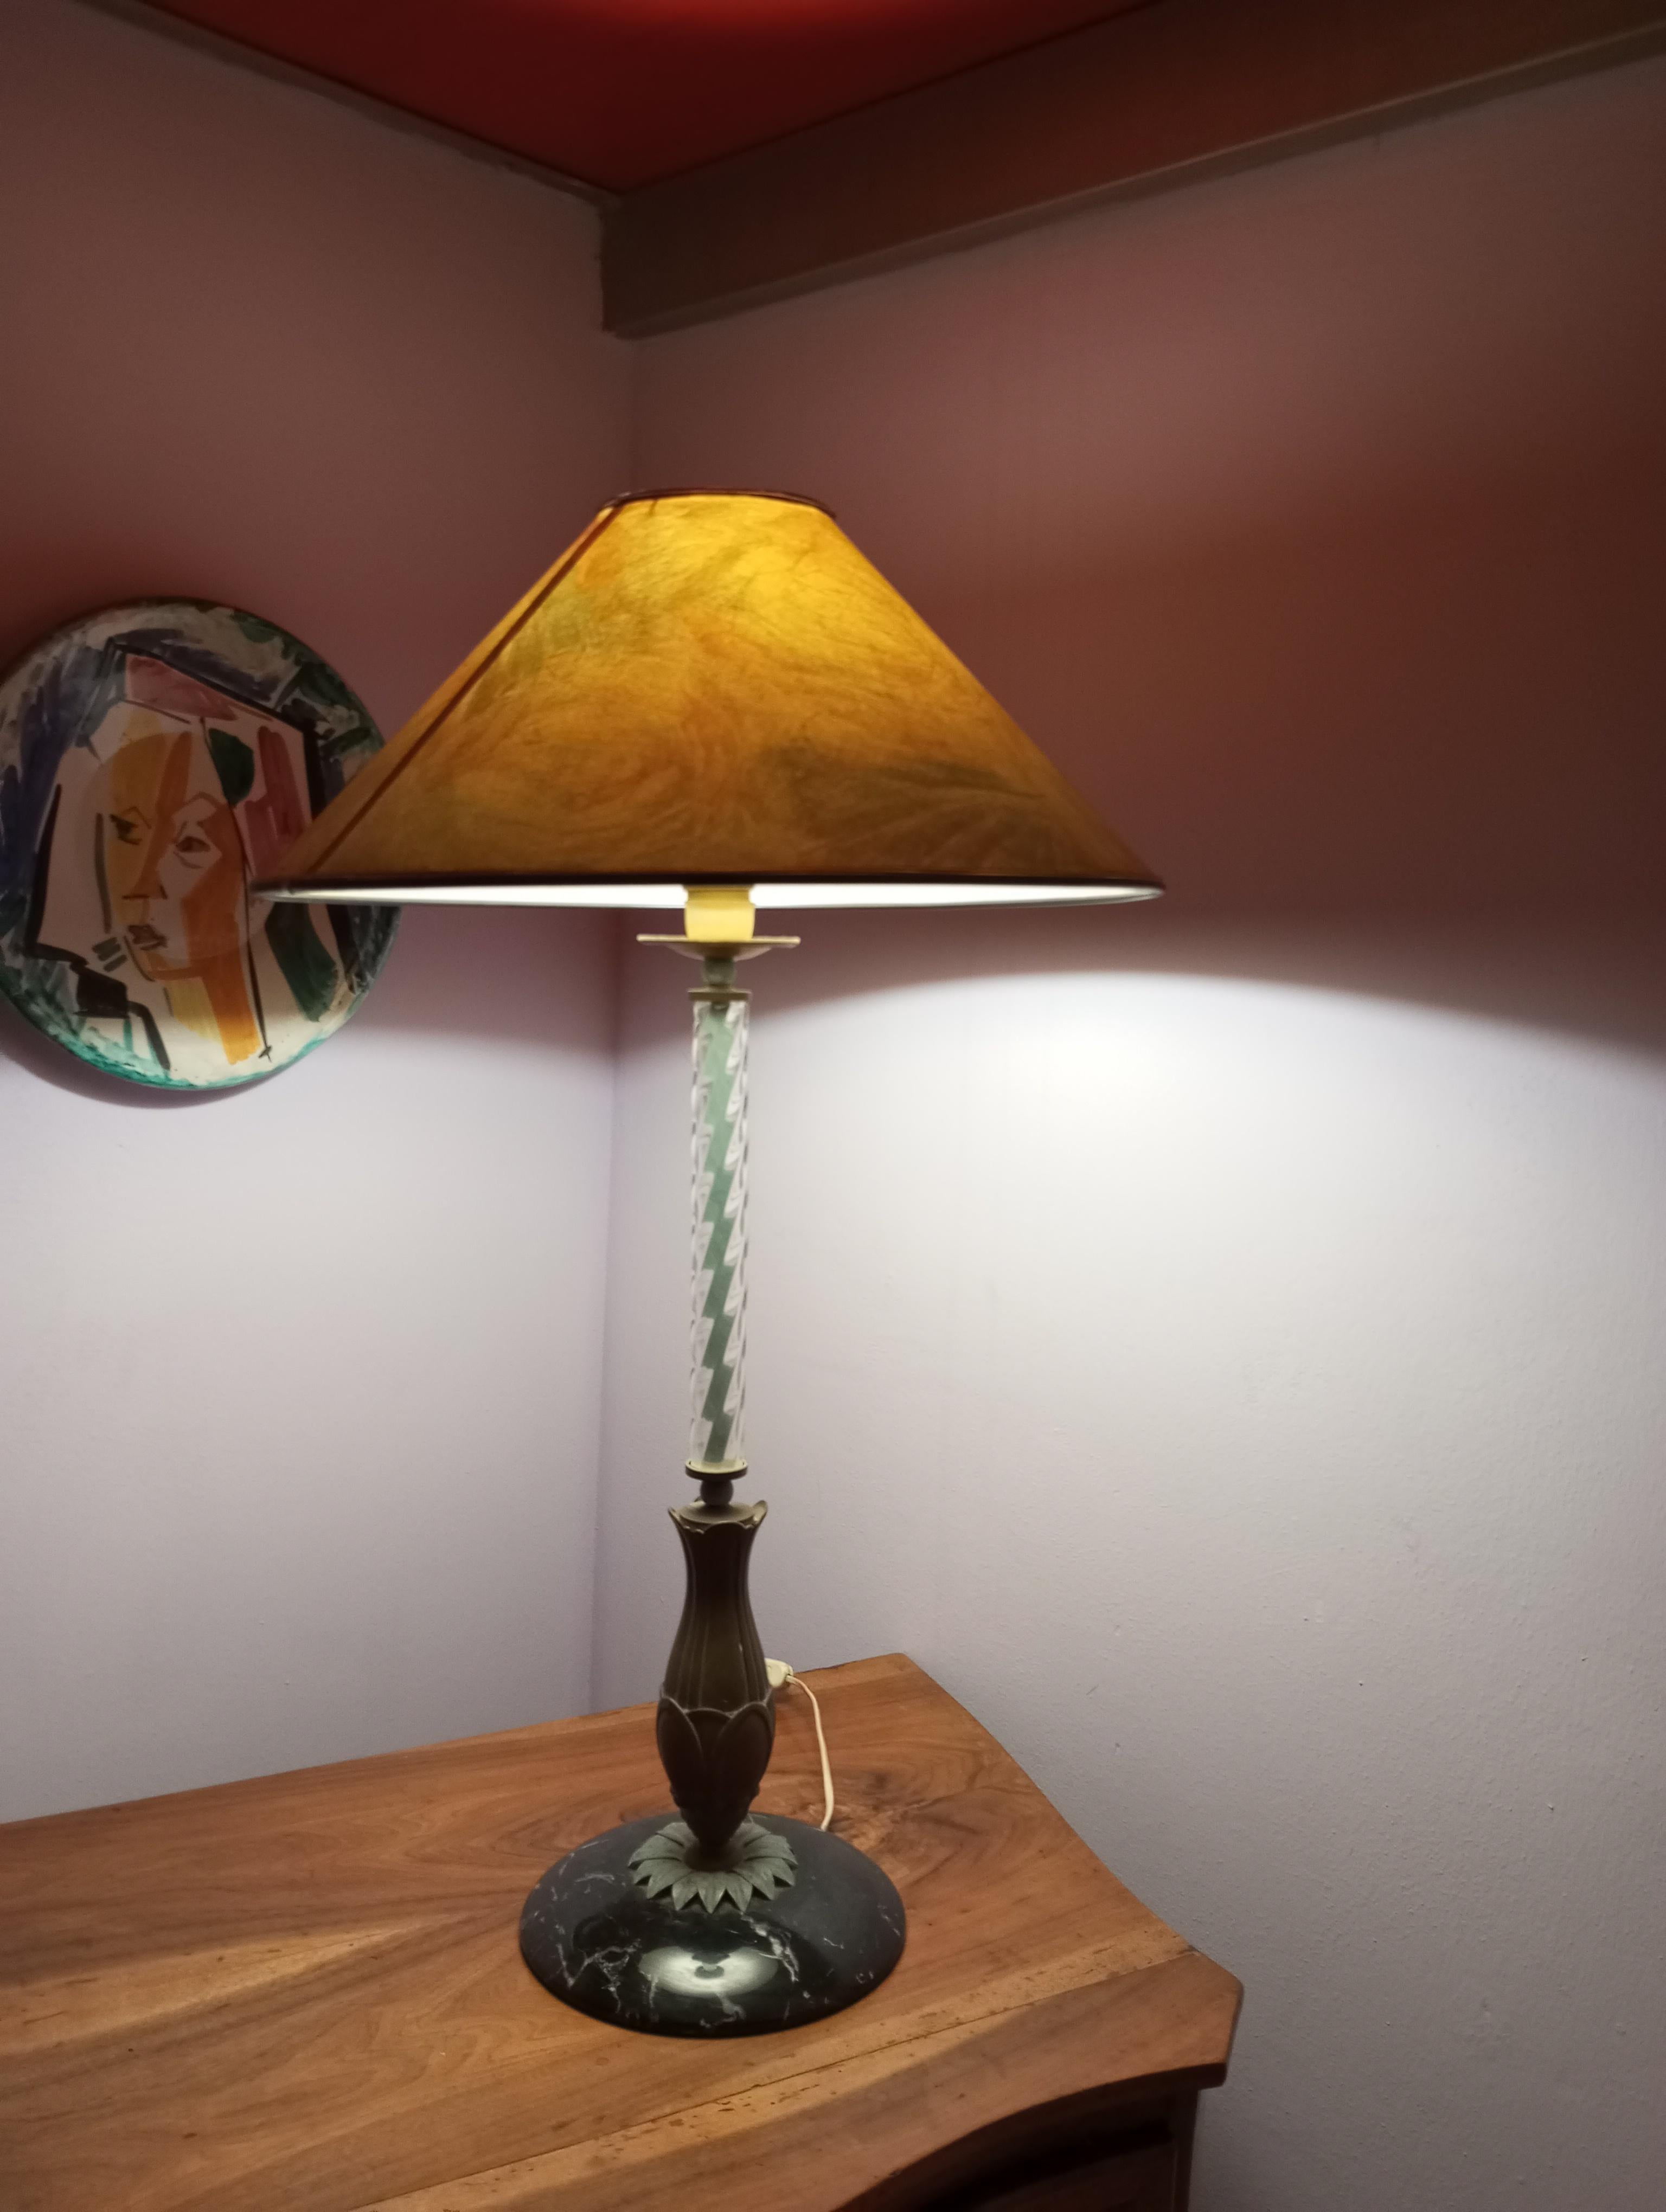 Table lamp with marble base and bronze leaf decoration, glass stem with hints of azure, like the subtle details on the lampshade. From the '50s. Height of 93 cm with a diameter of 54 cm, while the marble base has a diameter of 25 cm.

